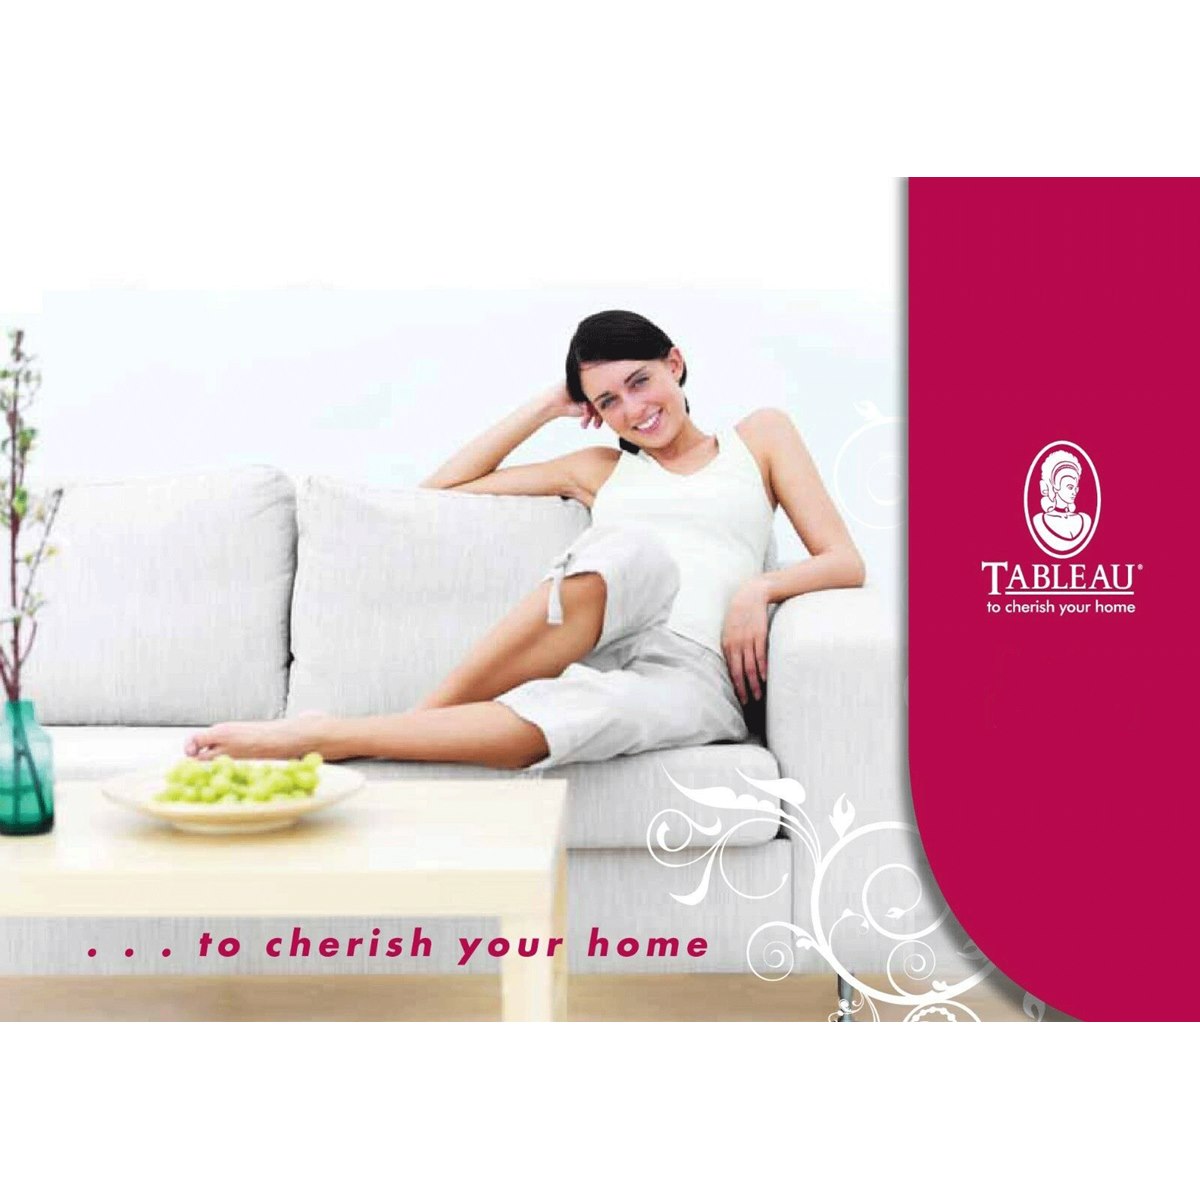 Tableau Household Products